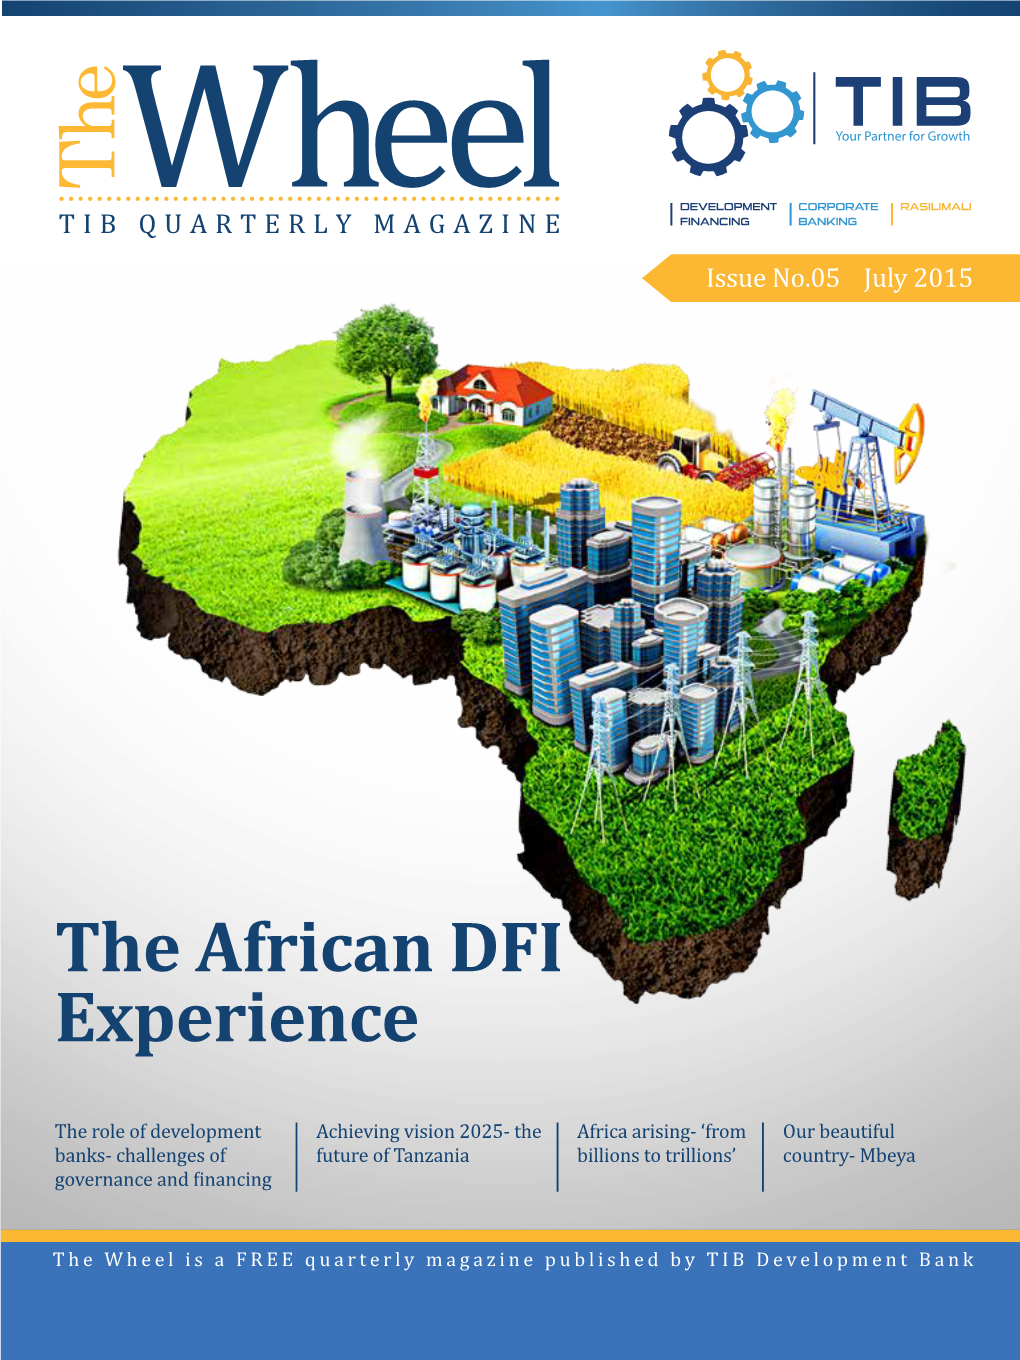 The African DFI Experience